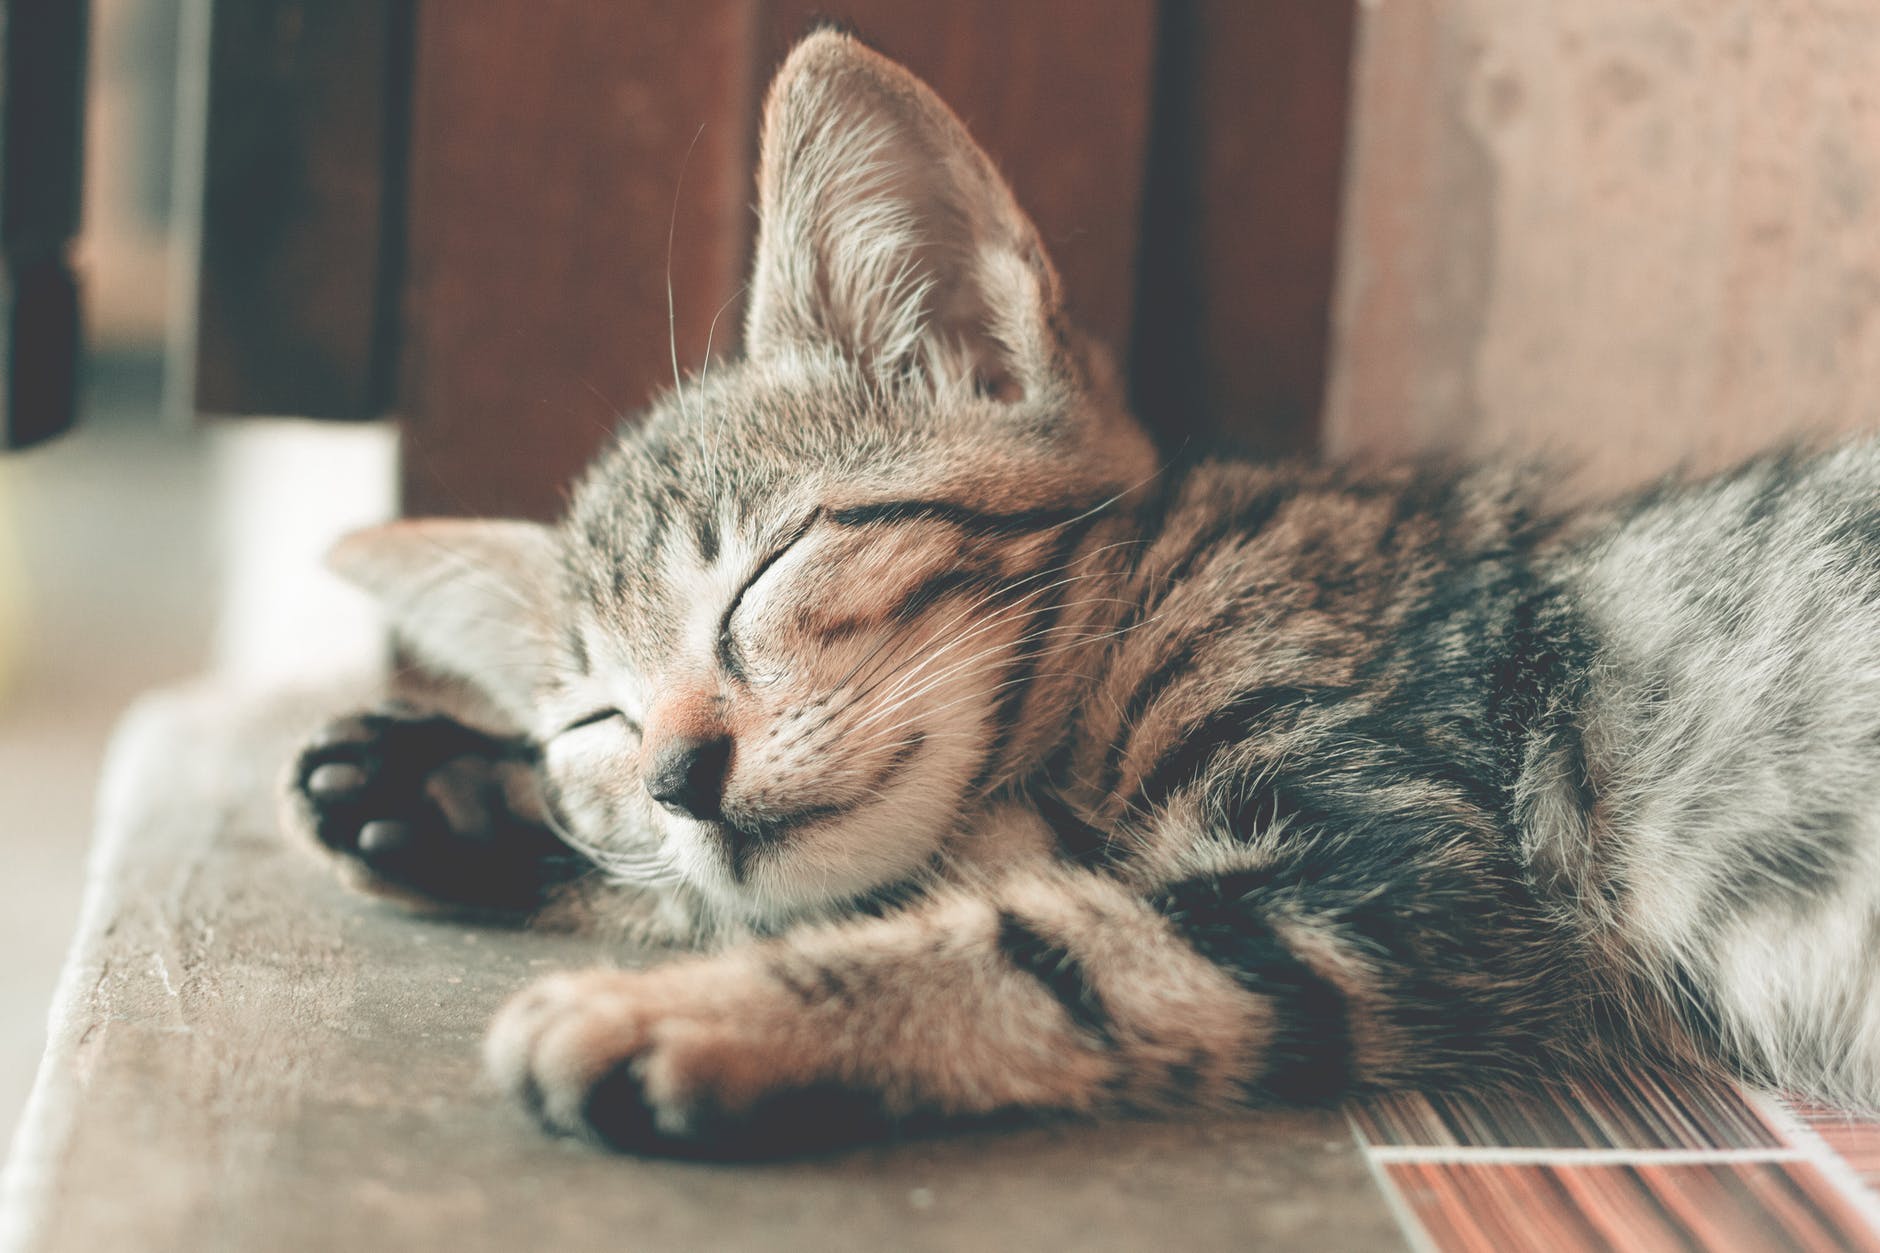 close up photography of sleeping tabby cat